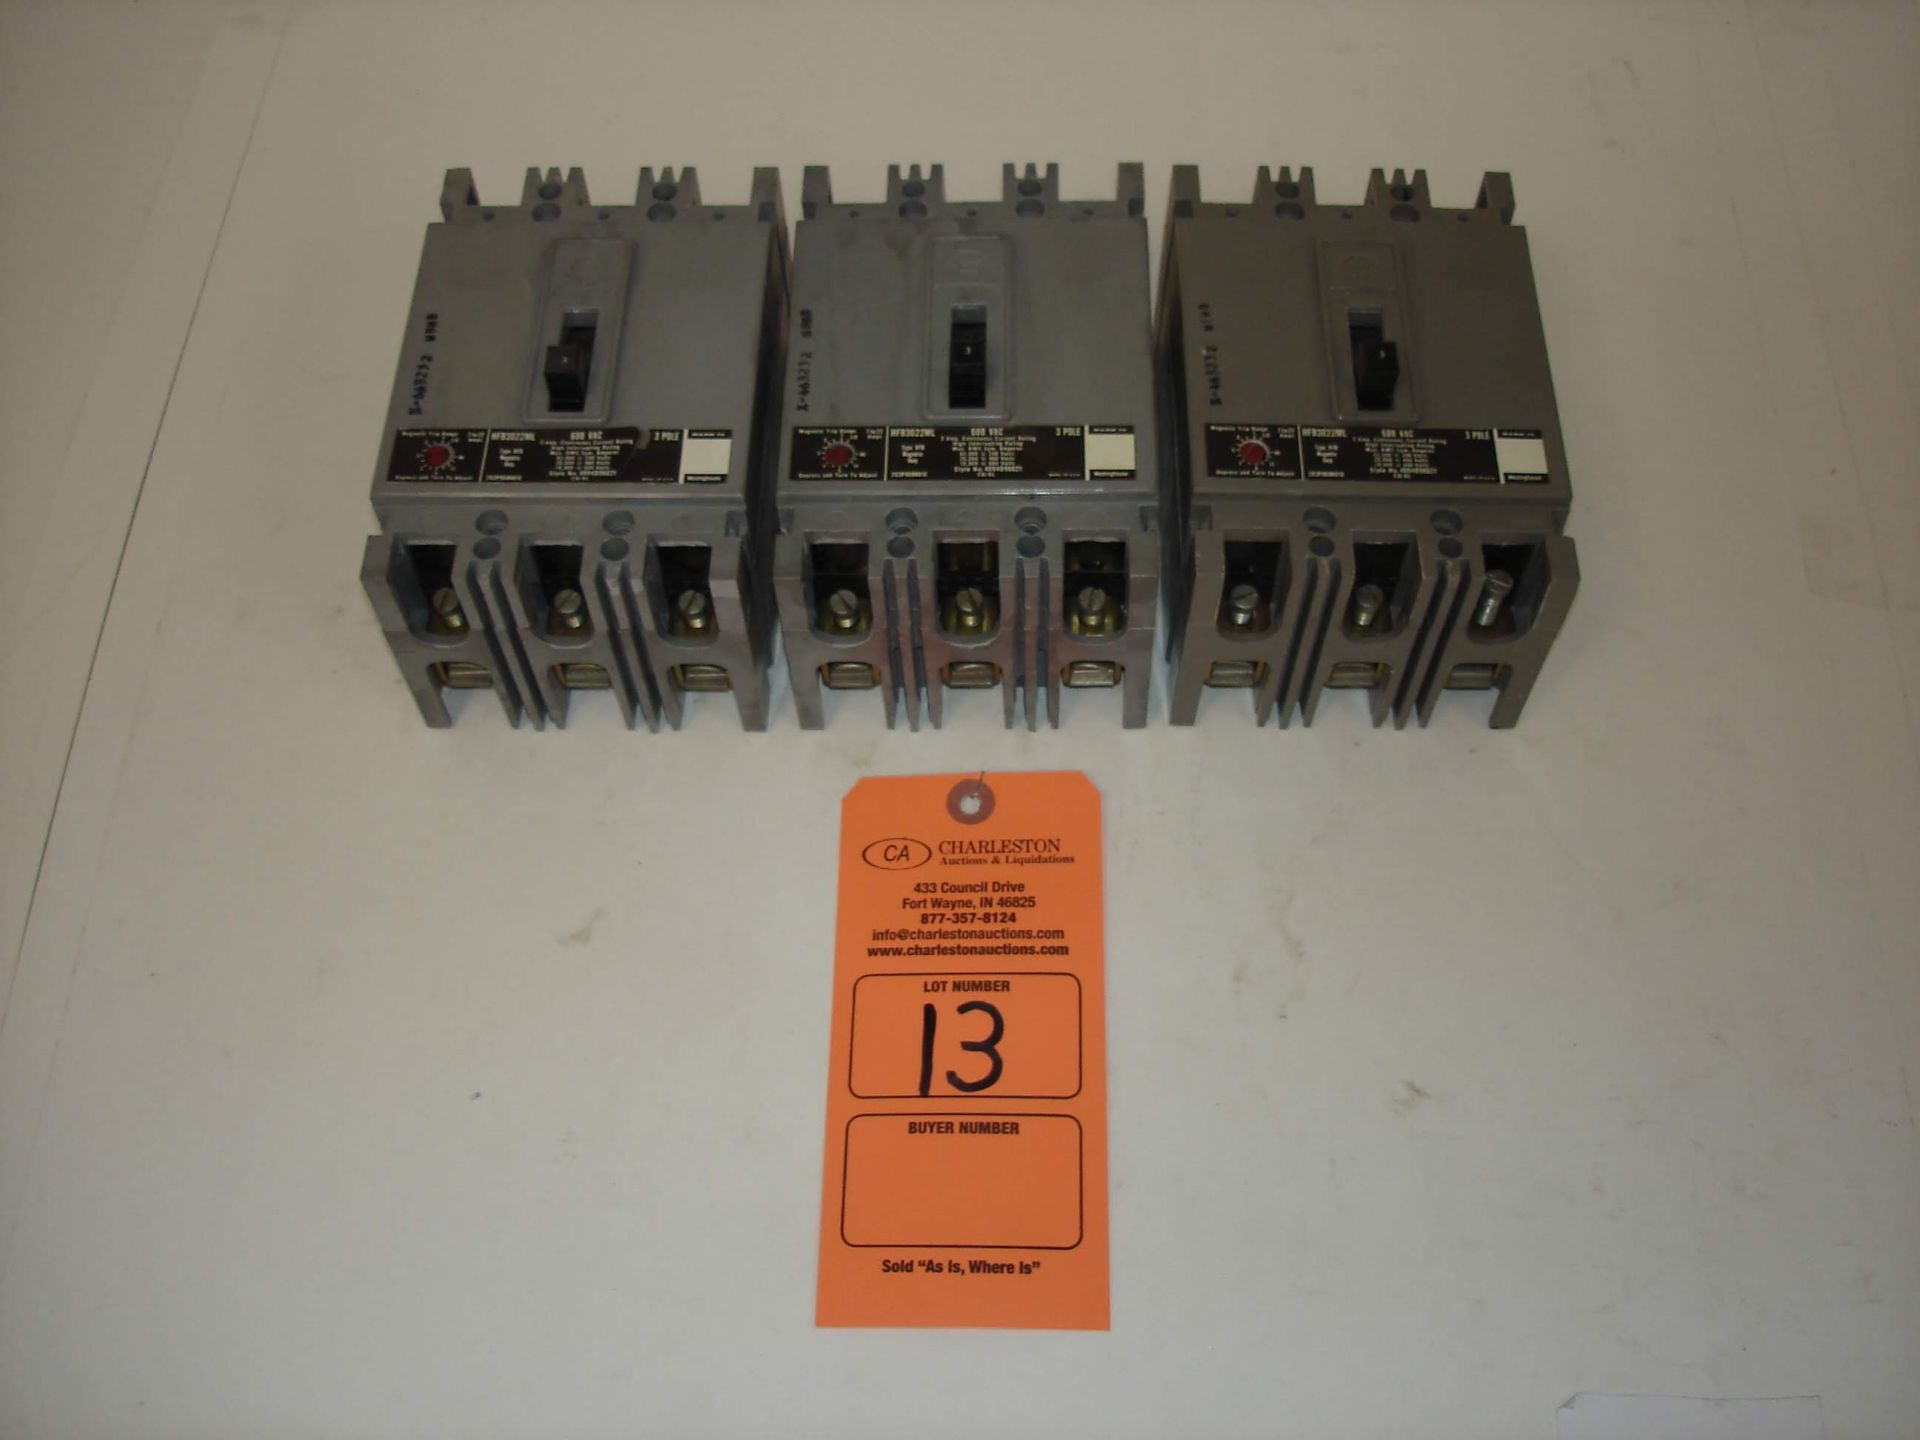 (3) WESTINGHOUSE MARK 75 BREAKERS HFB3022ML: ALL ITEMS INCLUDED IN PHOTOS! (LOCATED AT: 1200 KIBBY